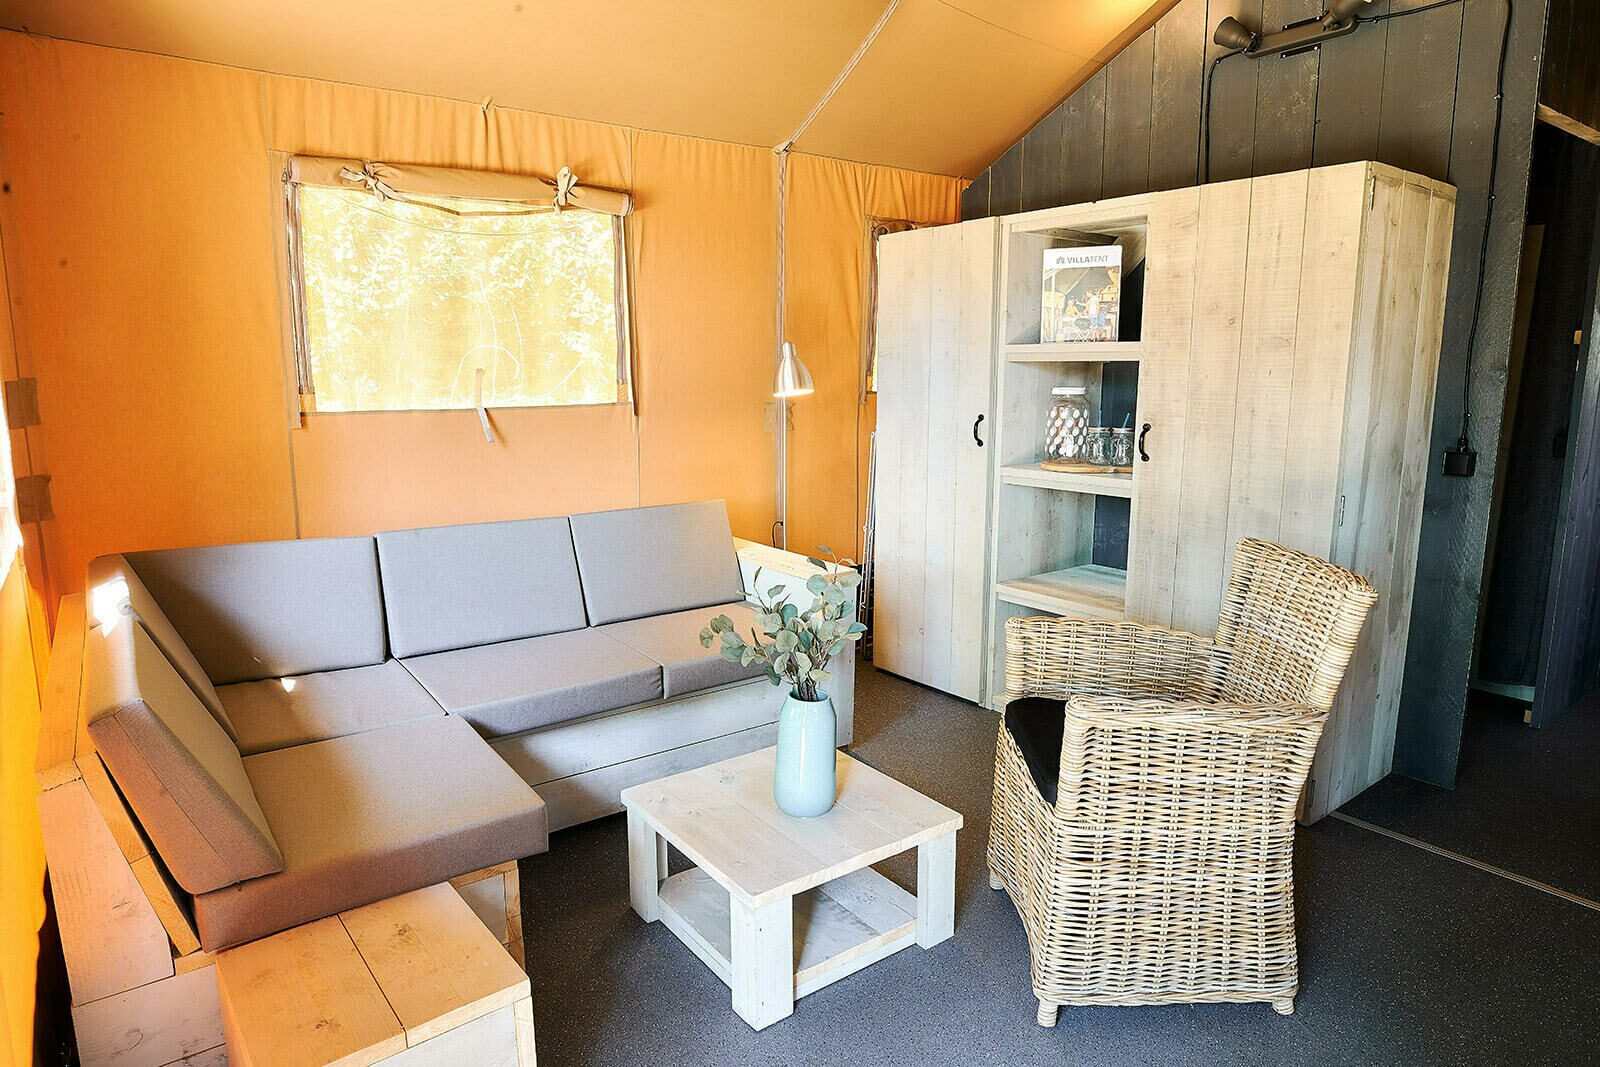 Camping Betuwestrand | Luxe Sanitary XL | 4-6 Pers.